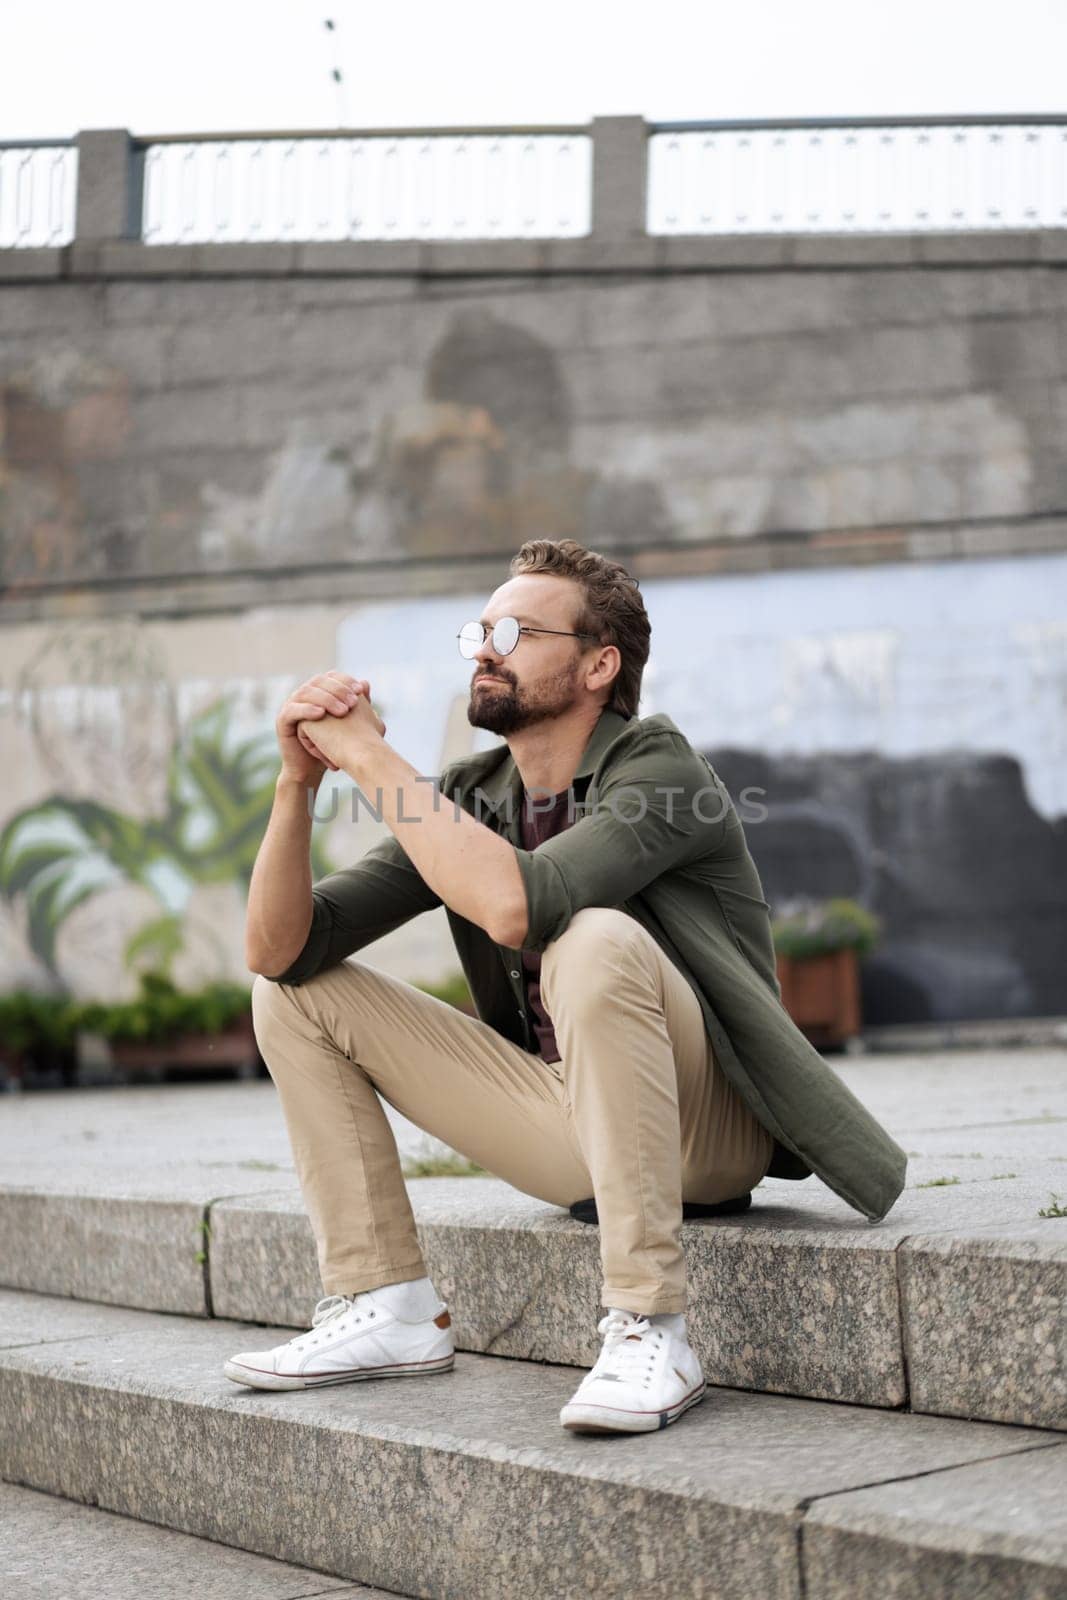 Dreamer, man seated on outdoor stairs, lost in thoughts and dreaming about plans for future. With serene and peaceful expression, he contemplates aspirations and envisions goals. . High quality photo